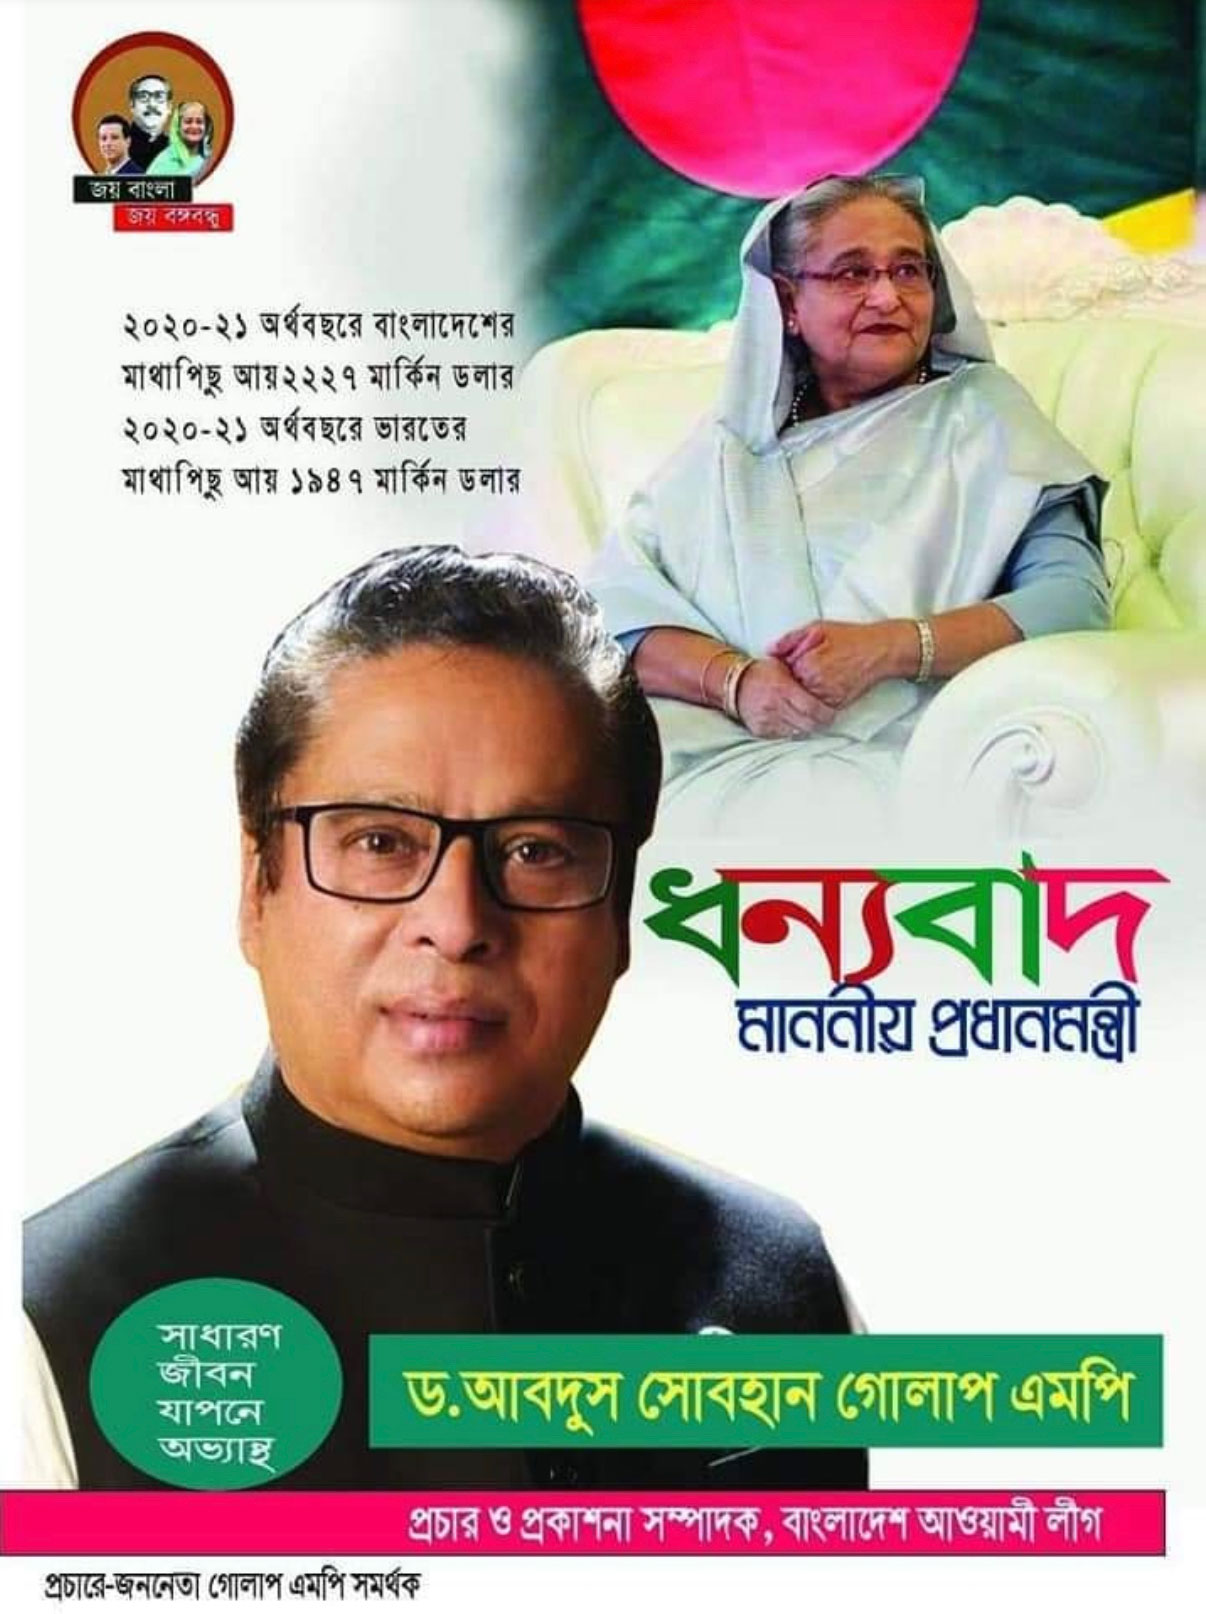 investigations/miah-campaign-poster-with-hasina.jpg